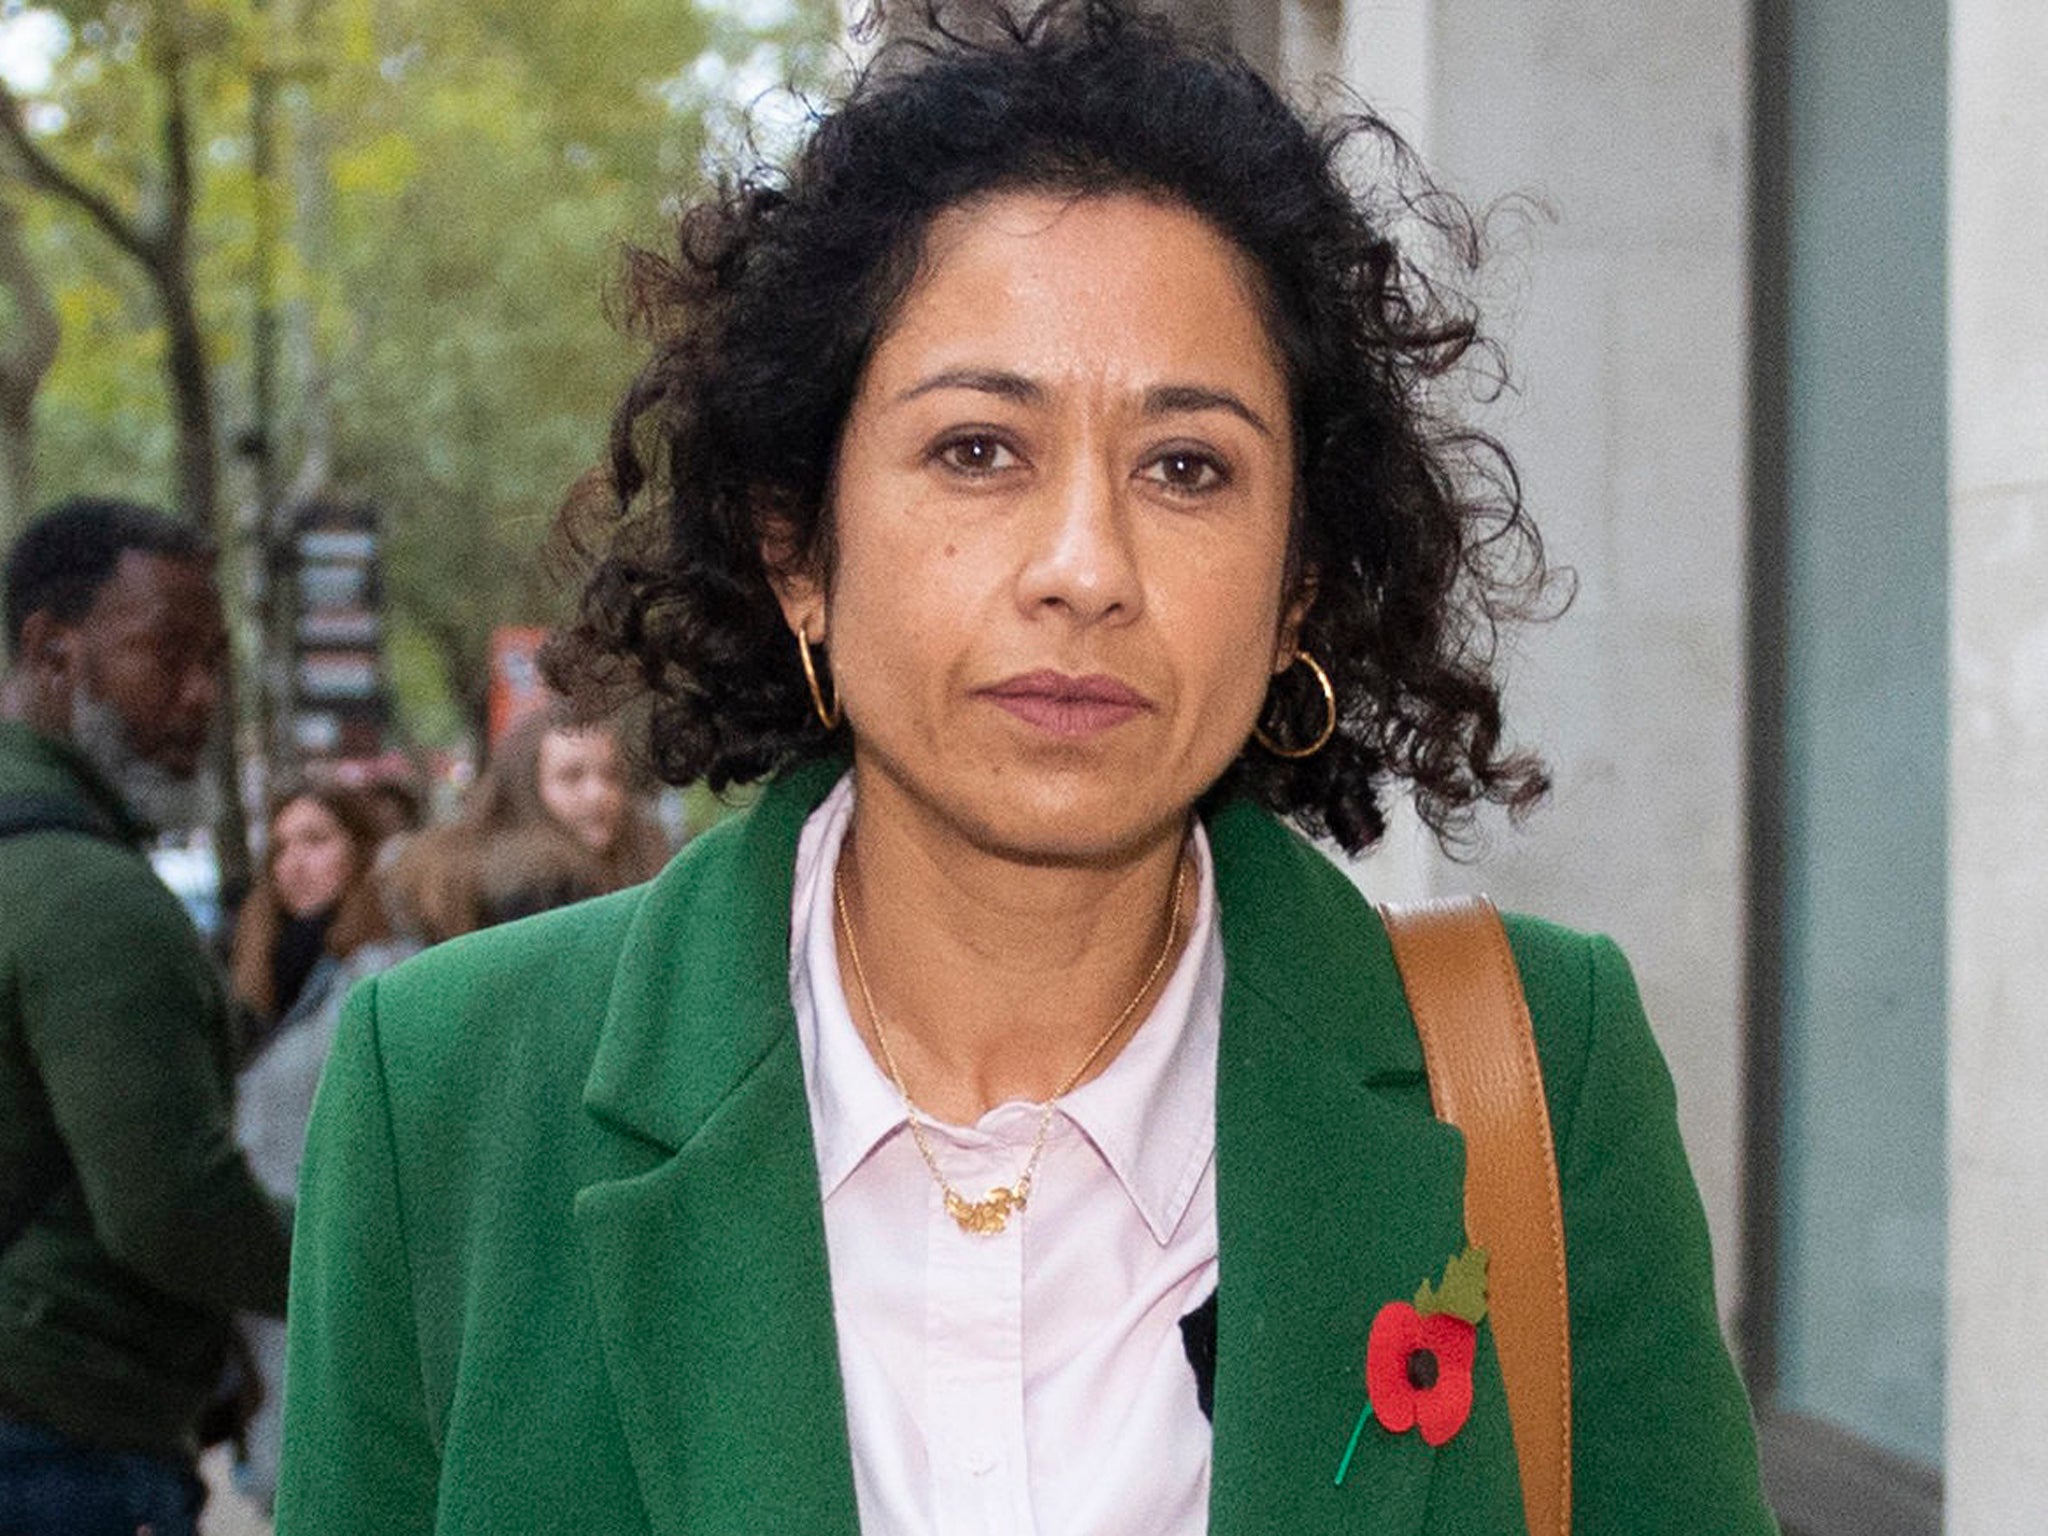 Presenter Samira Ahmed won an employment tribunal against the BBC, which showed she was paid £700,000 less than Jeremy Vine